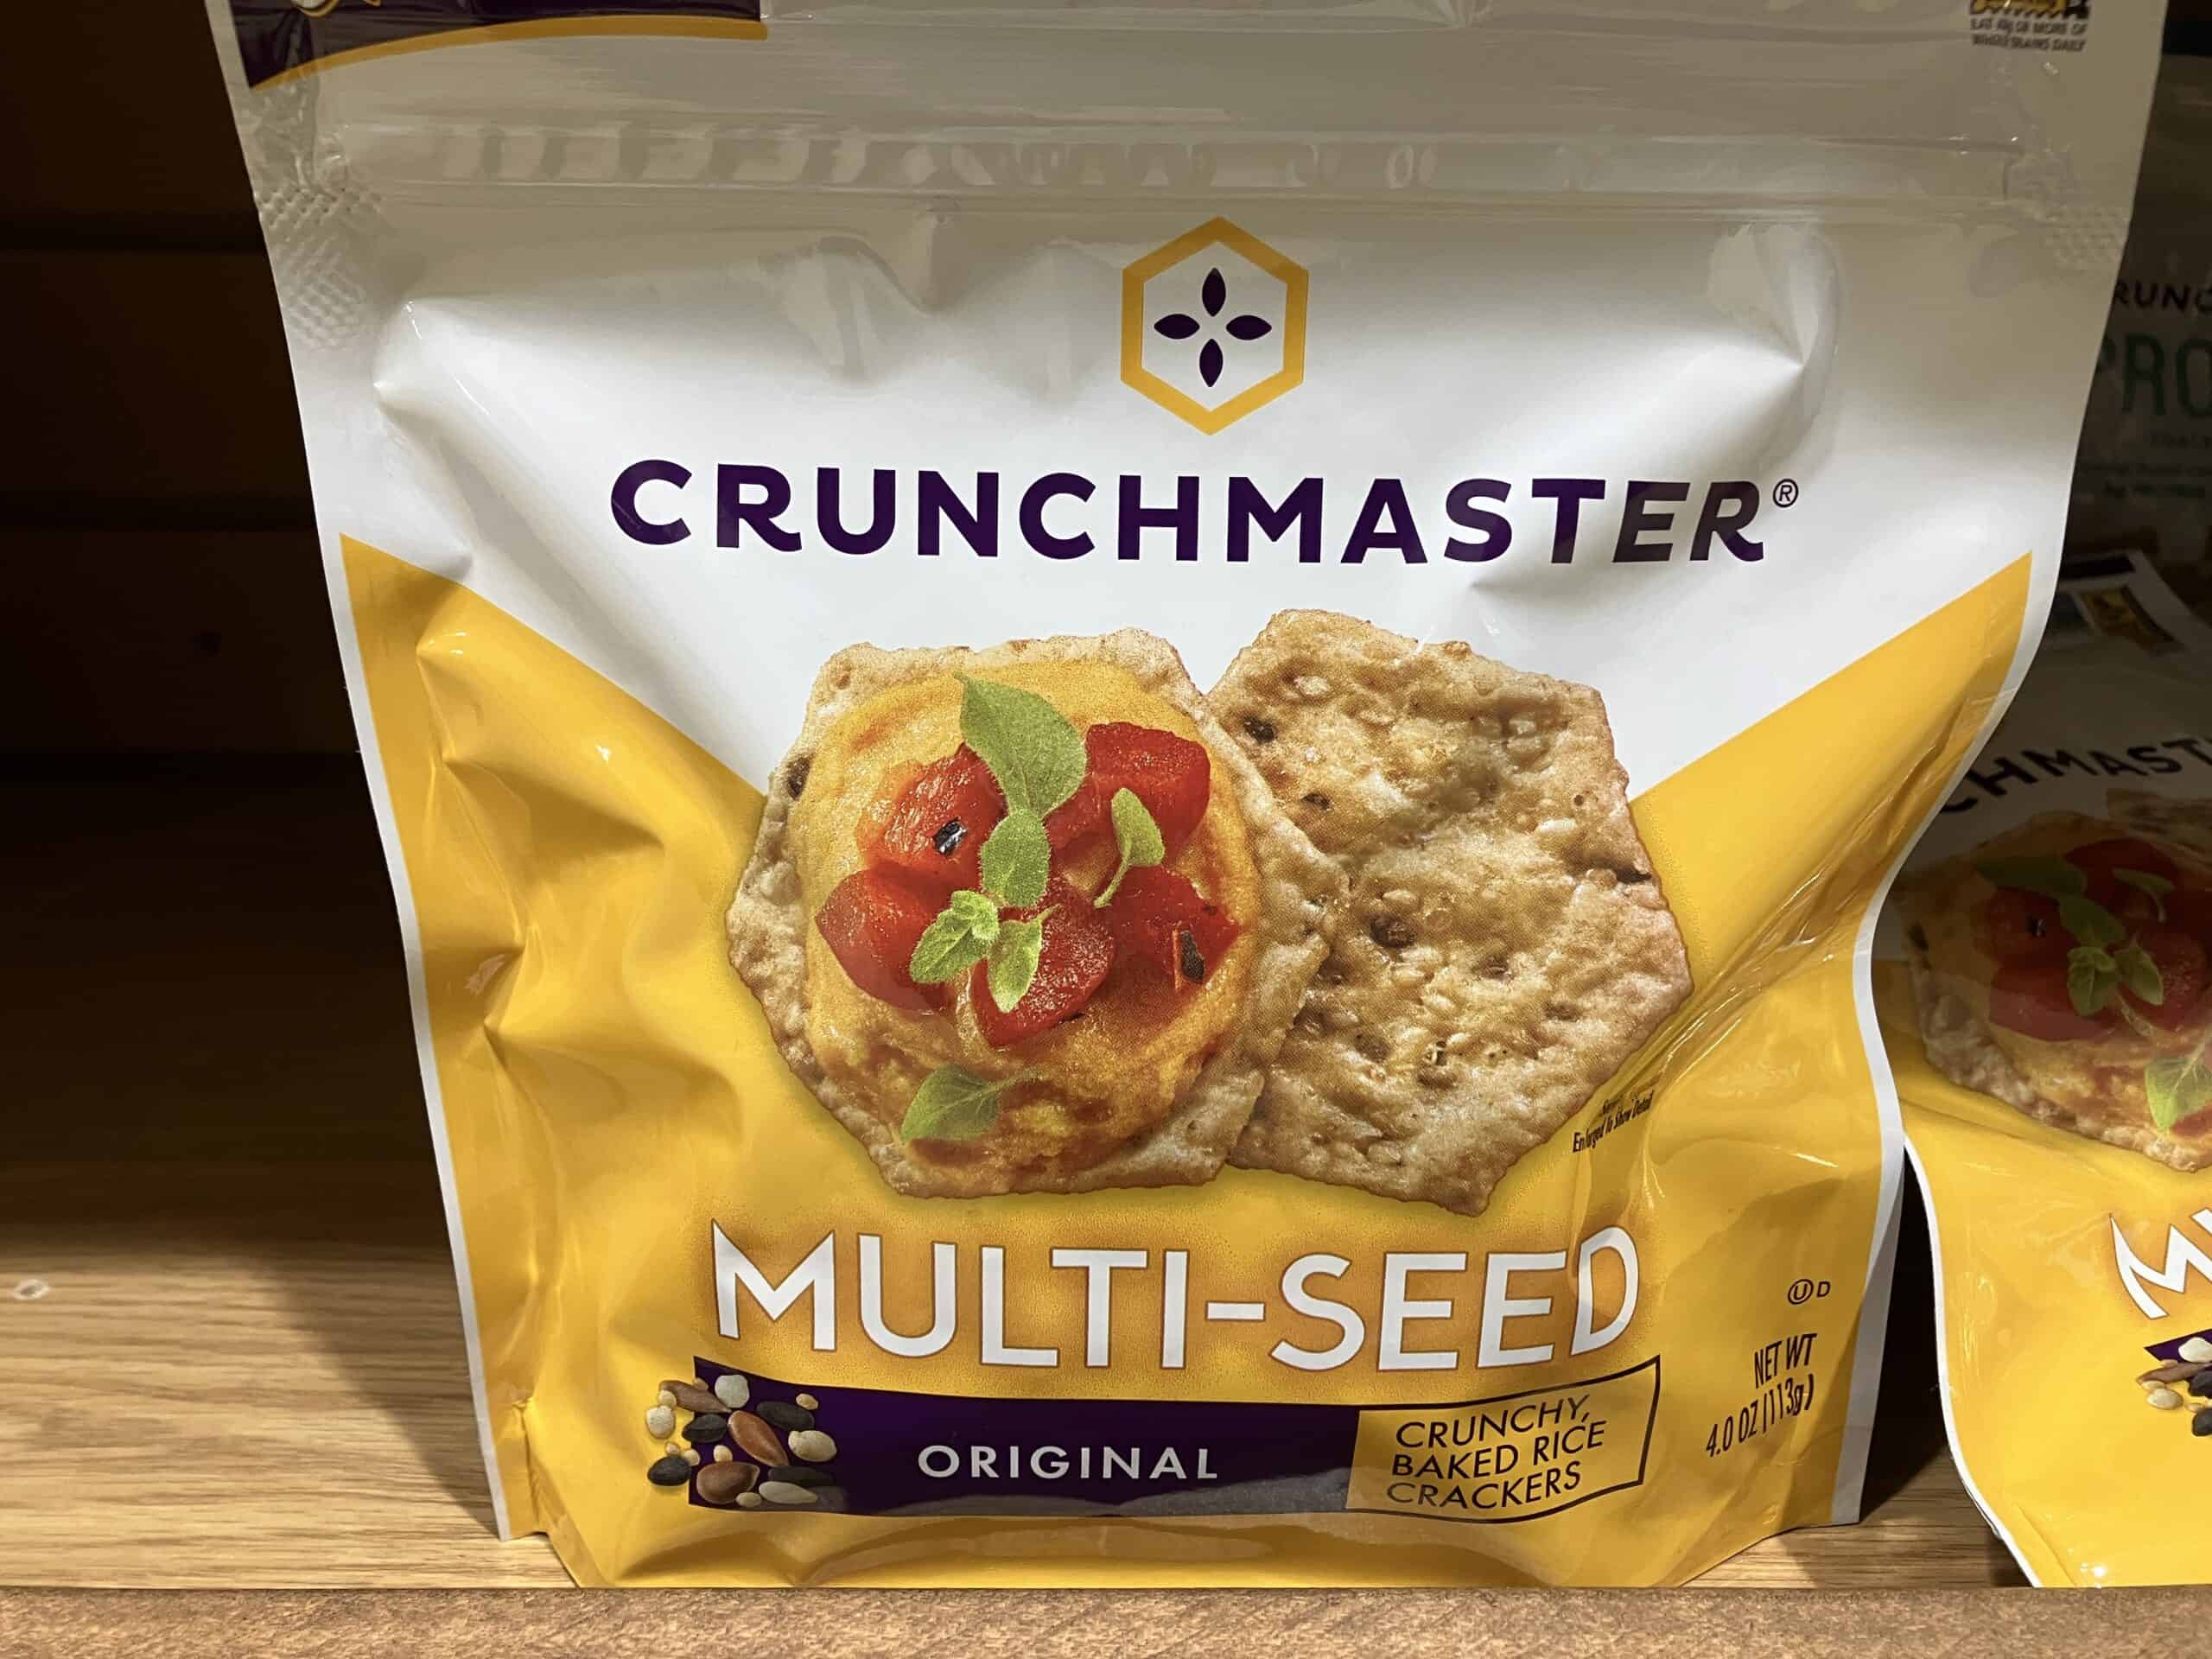 Crunchmaster multi-seed crackers